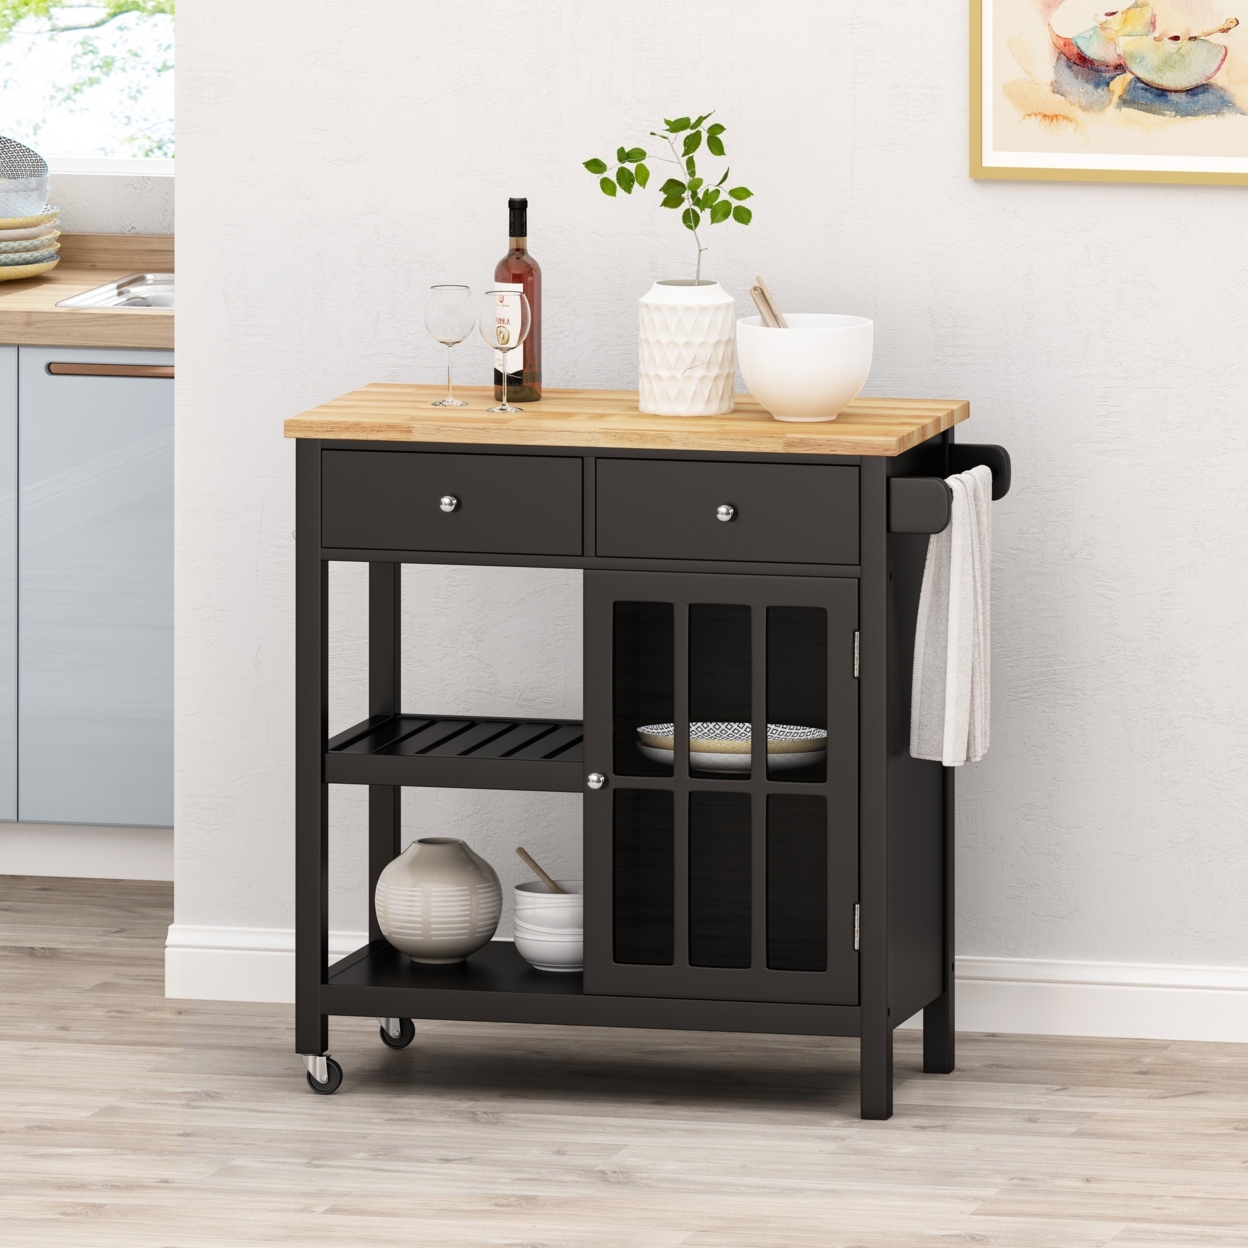 Aidah Contemporary Kitchen Cart With Wheels - Black